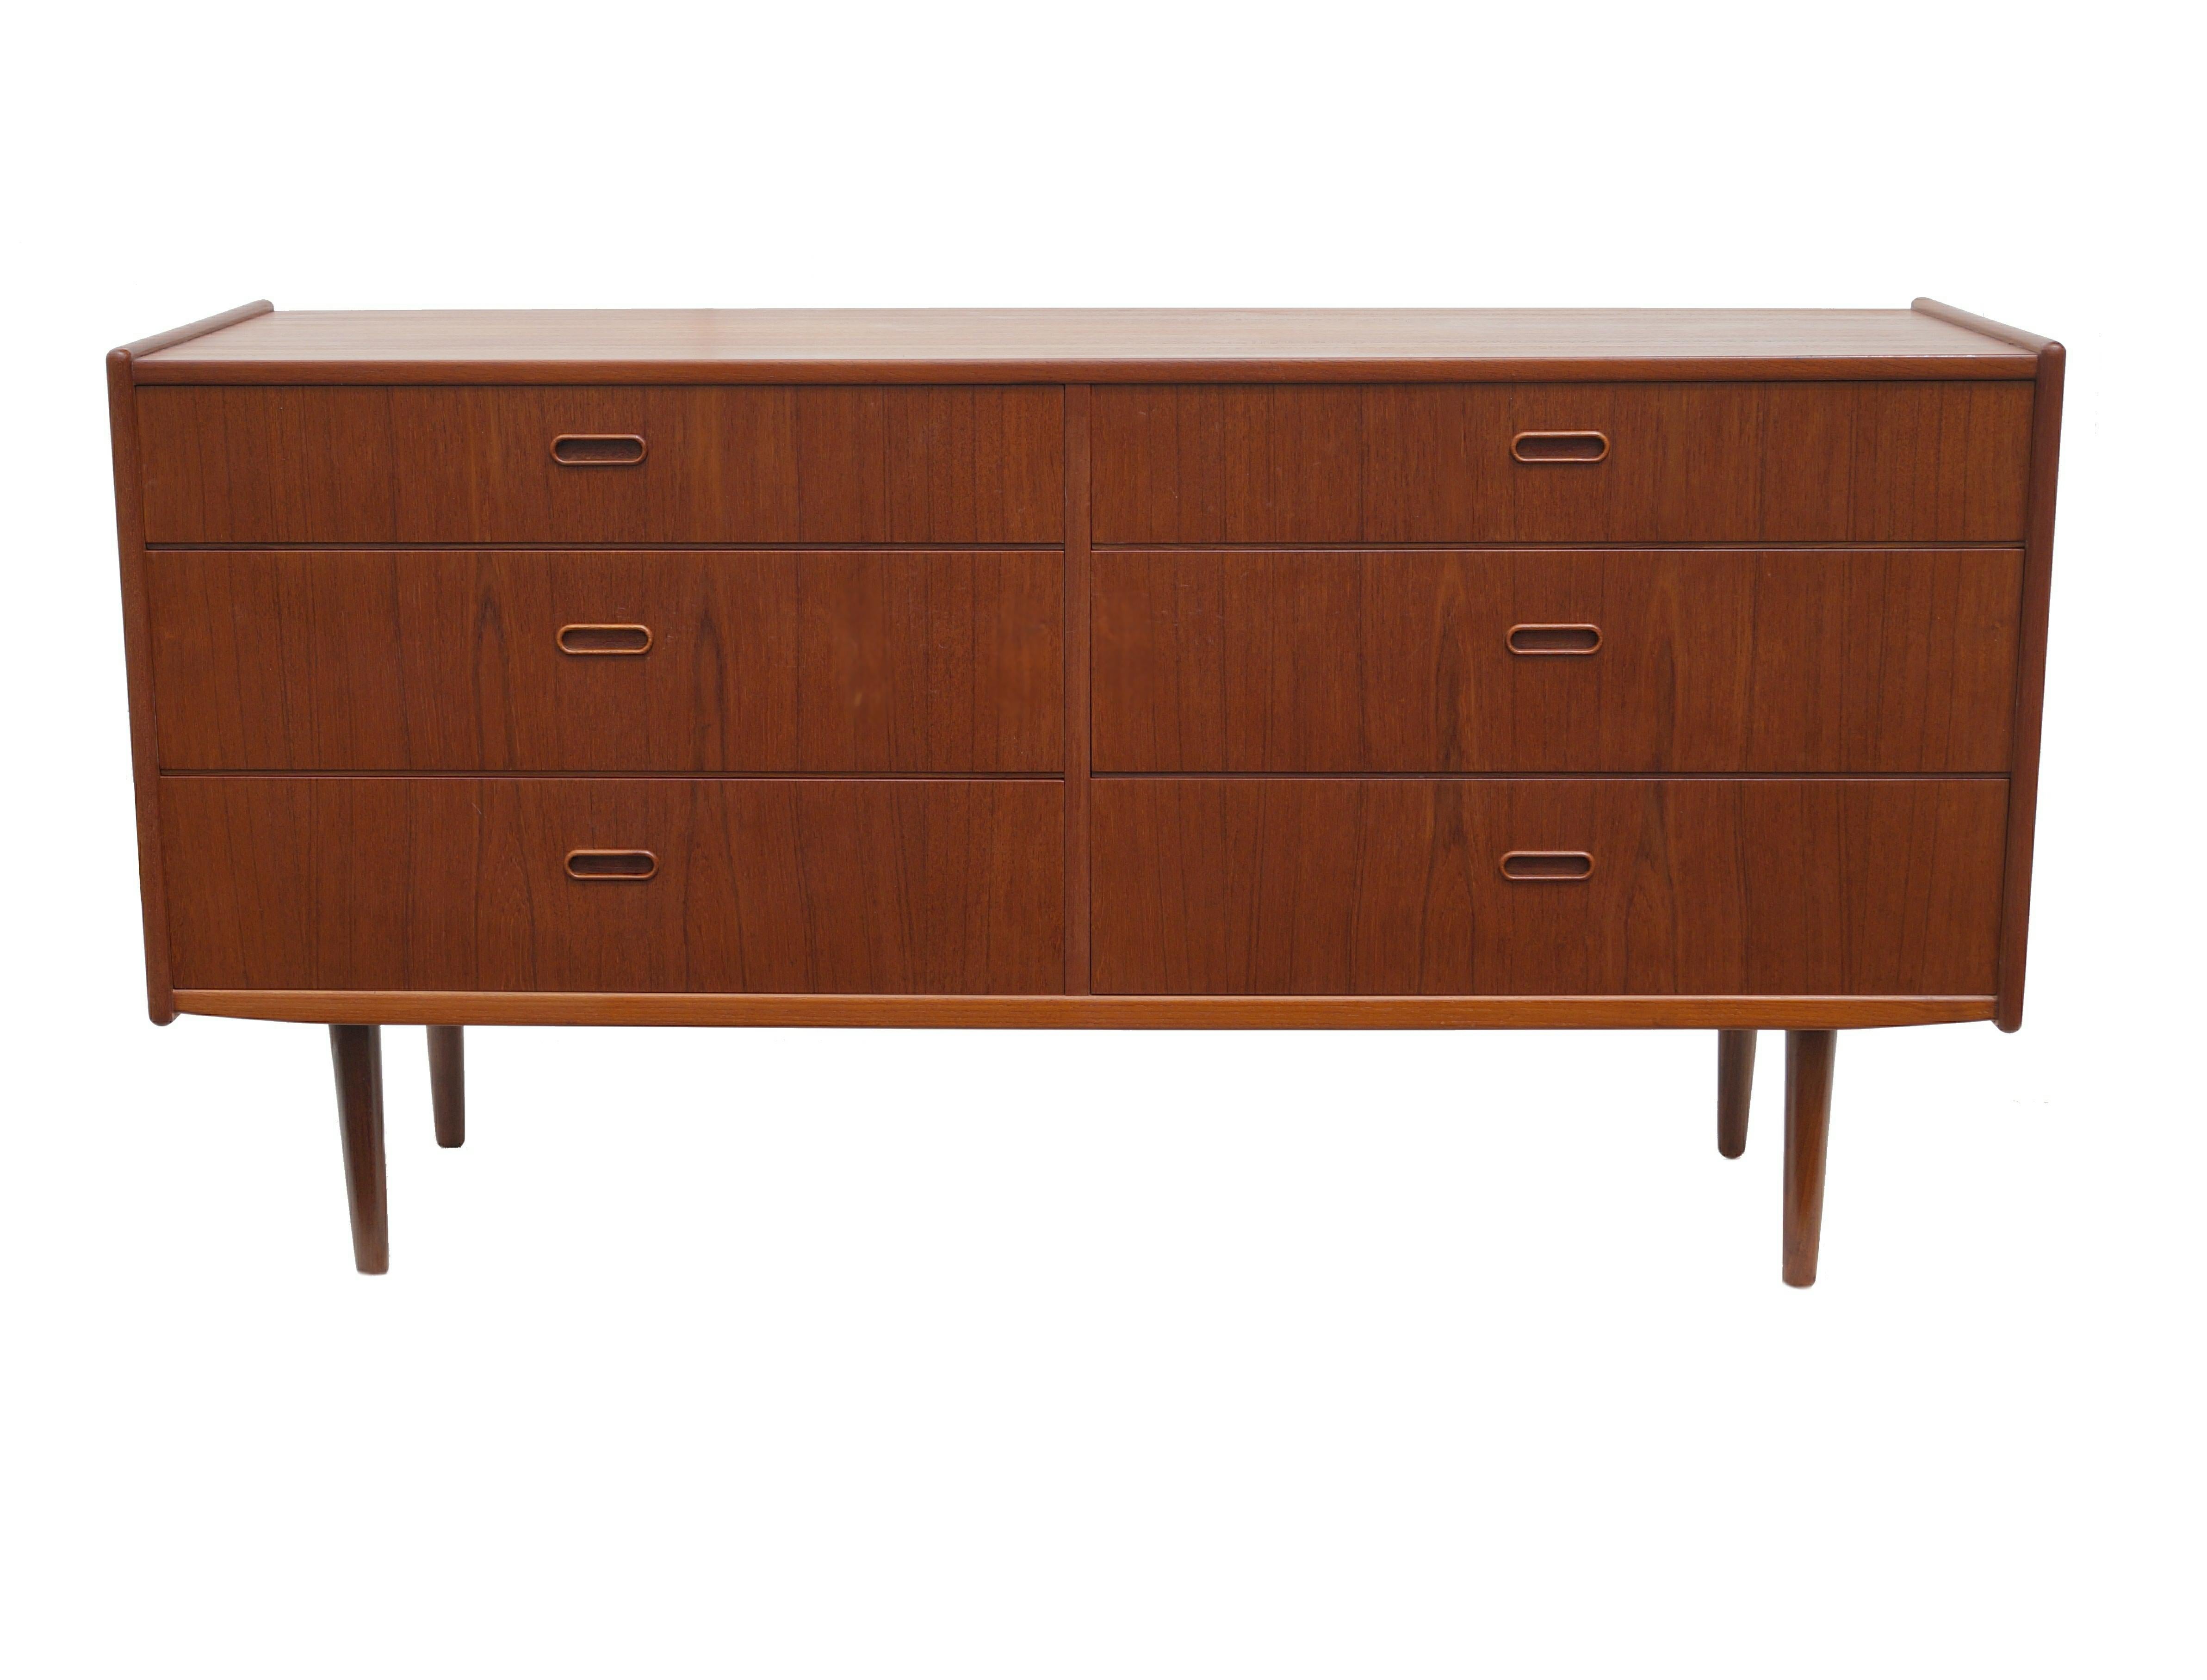 Danish Mid-Century Modern teak dresser. Back is unfinished.
If you are in the New Jersey , New York City Metro Area , please contact us with your delivery zip code, as we may be able to deliver curbside for less than the calculated White Glove rates